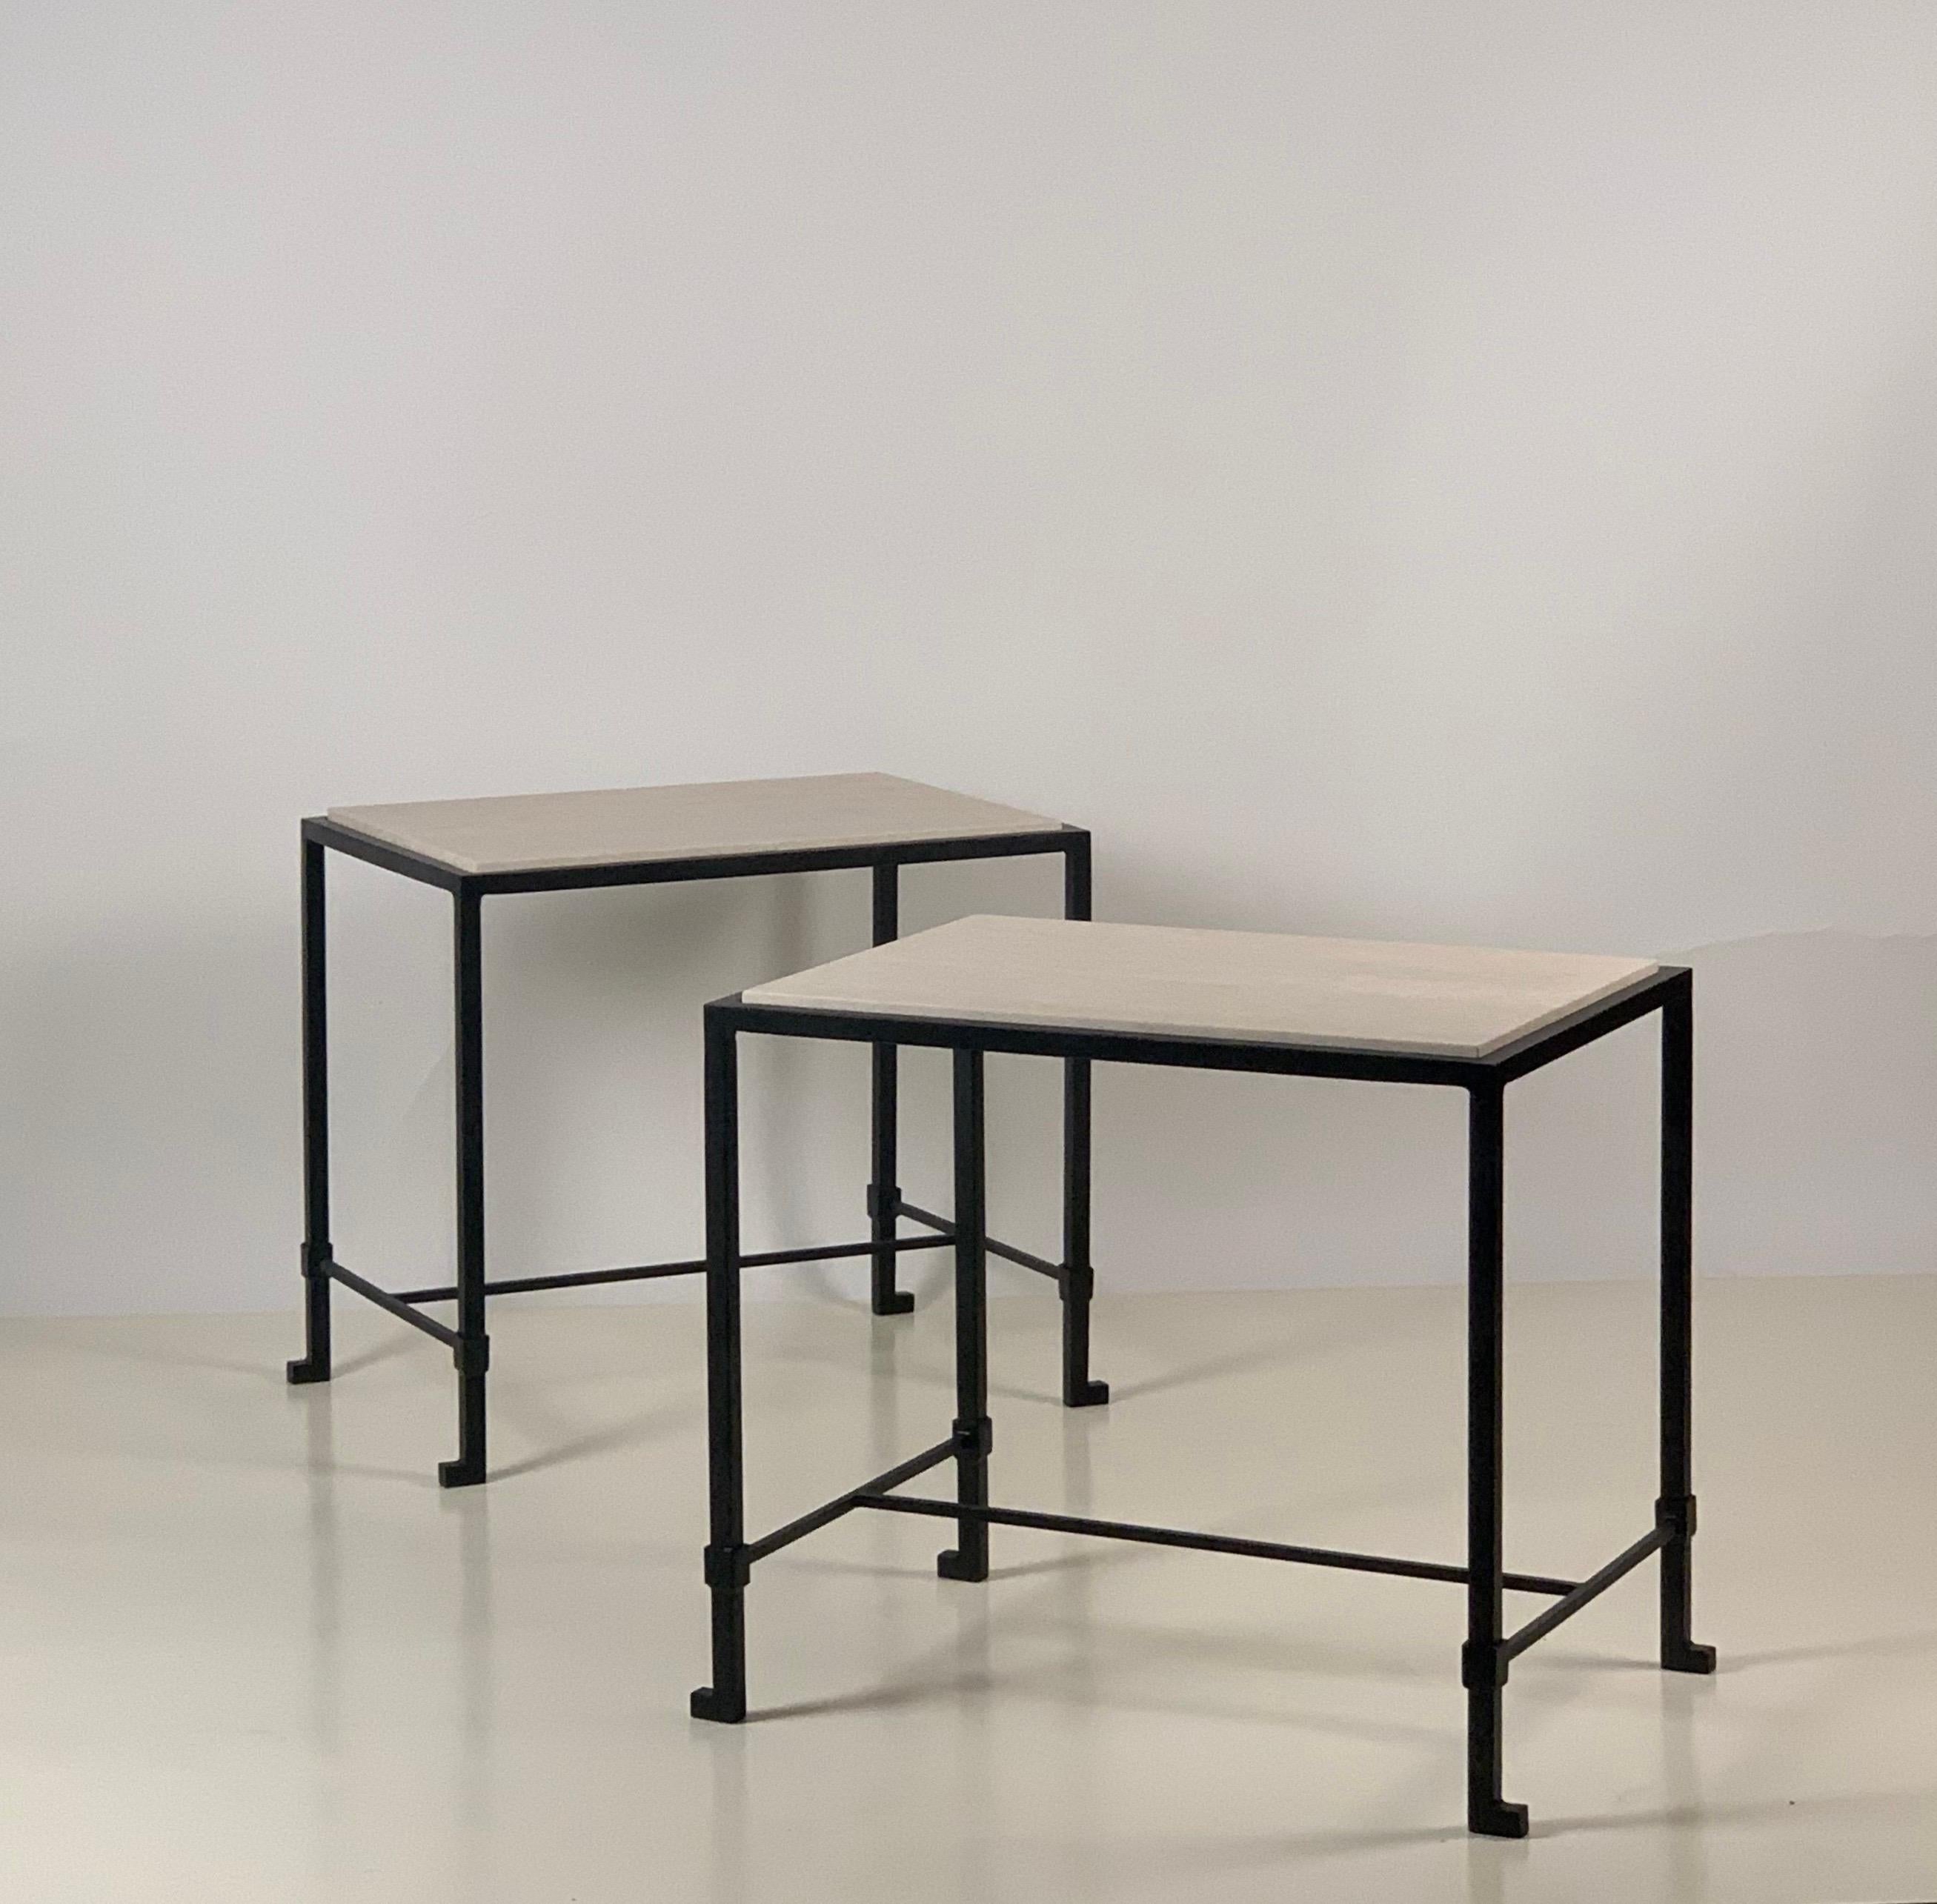 Introducing our 'Diagramme' Art Deco-inspired side tables, a harmonious blend of timeless elegance and modern sophistication.

These chic side tables are a harmonious blend of blackened iron and cream honed travertine, combining the rich allure of